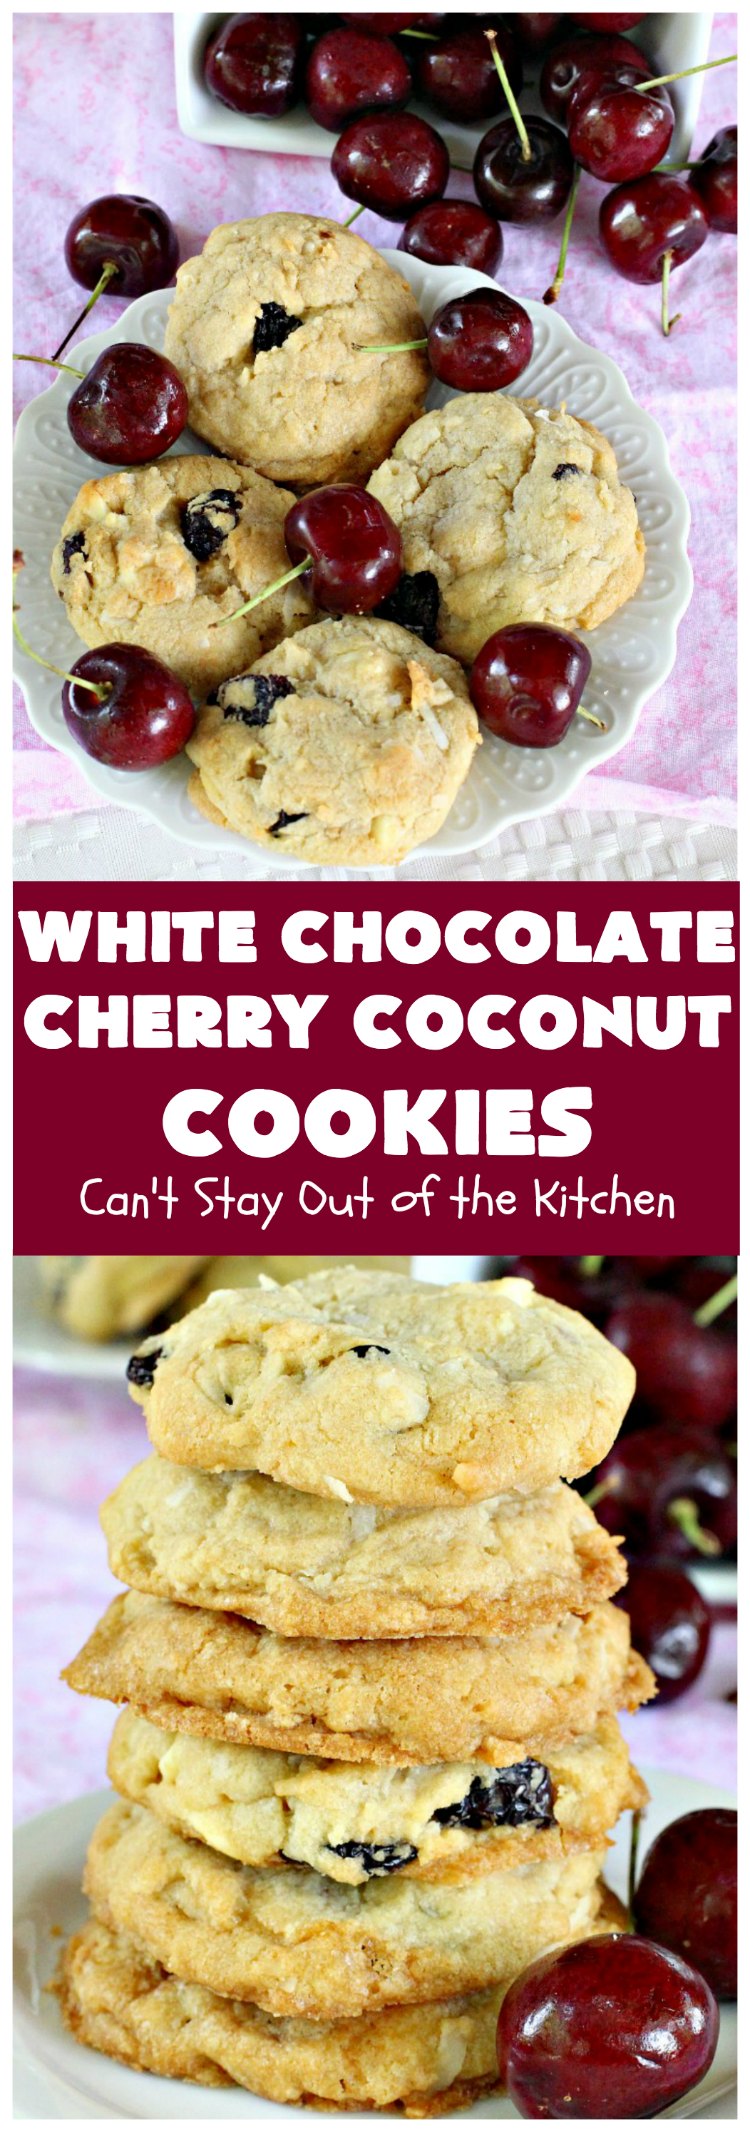 White Chocolate Cherry Coconut Cookies | Can't Stay Out of the Kitchen